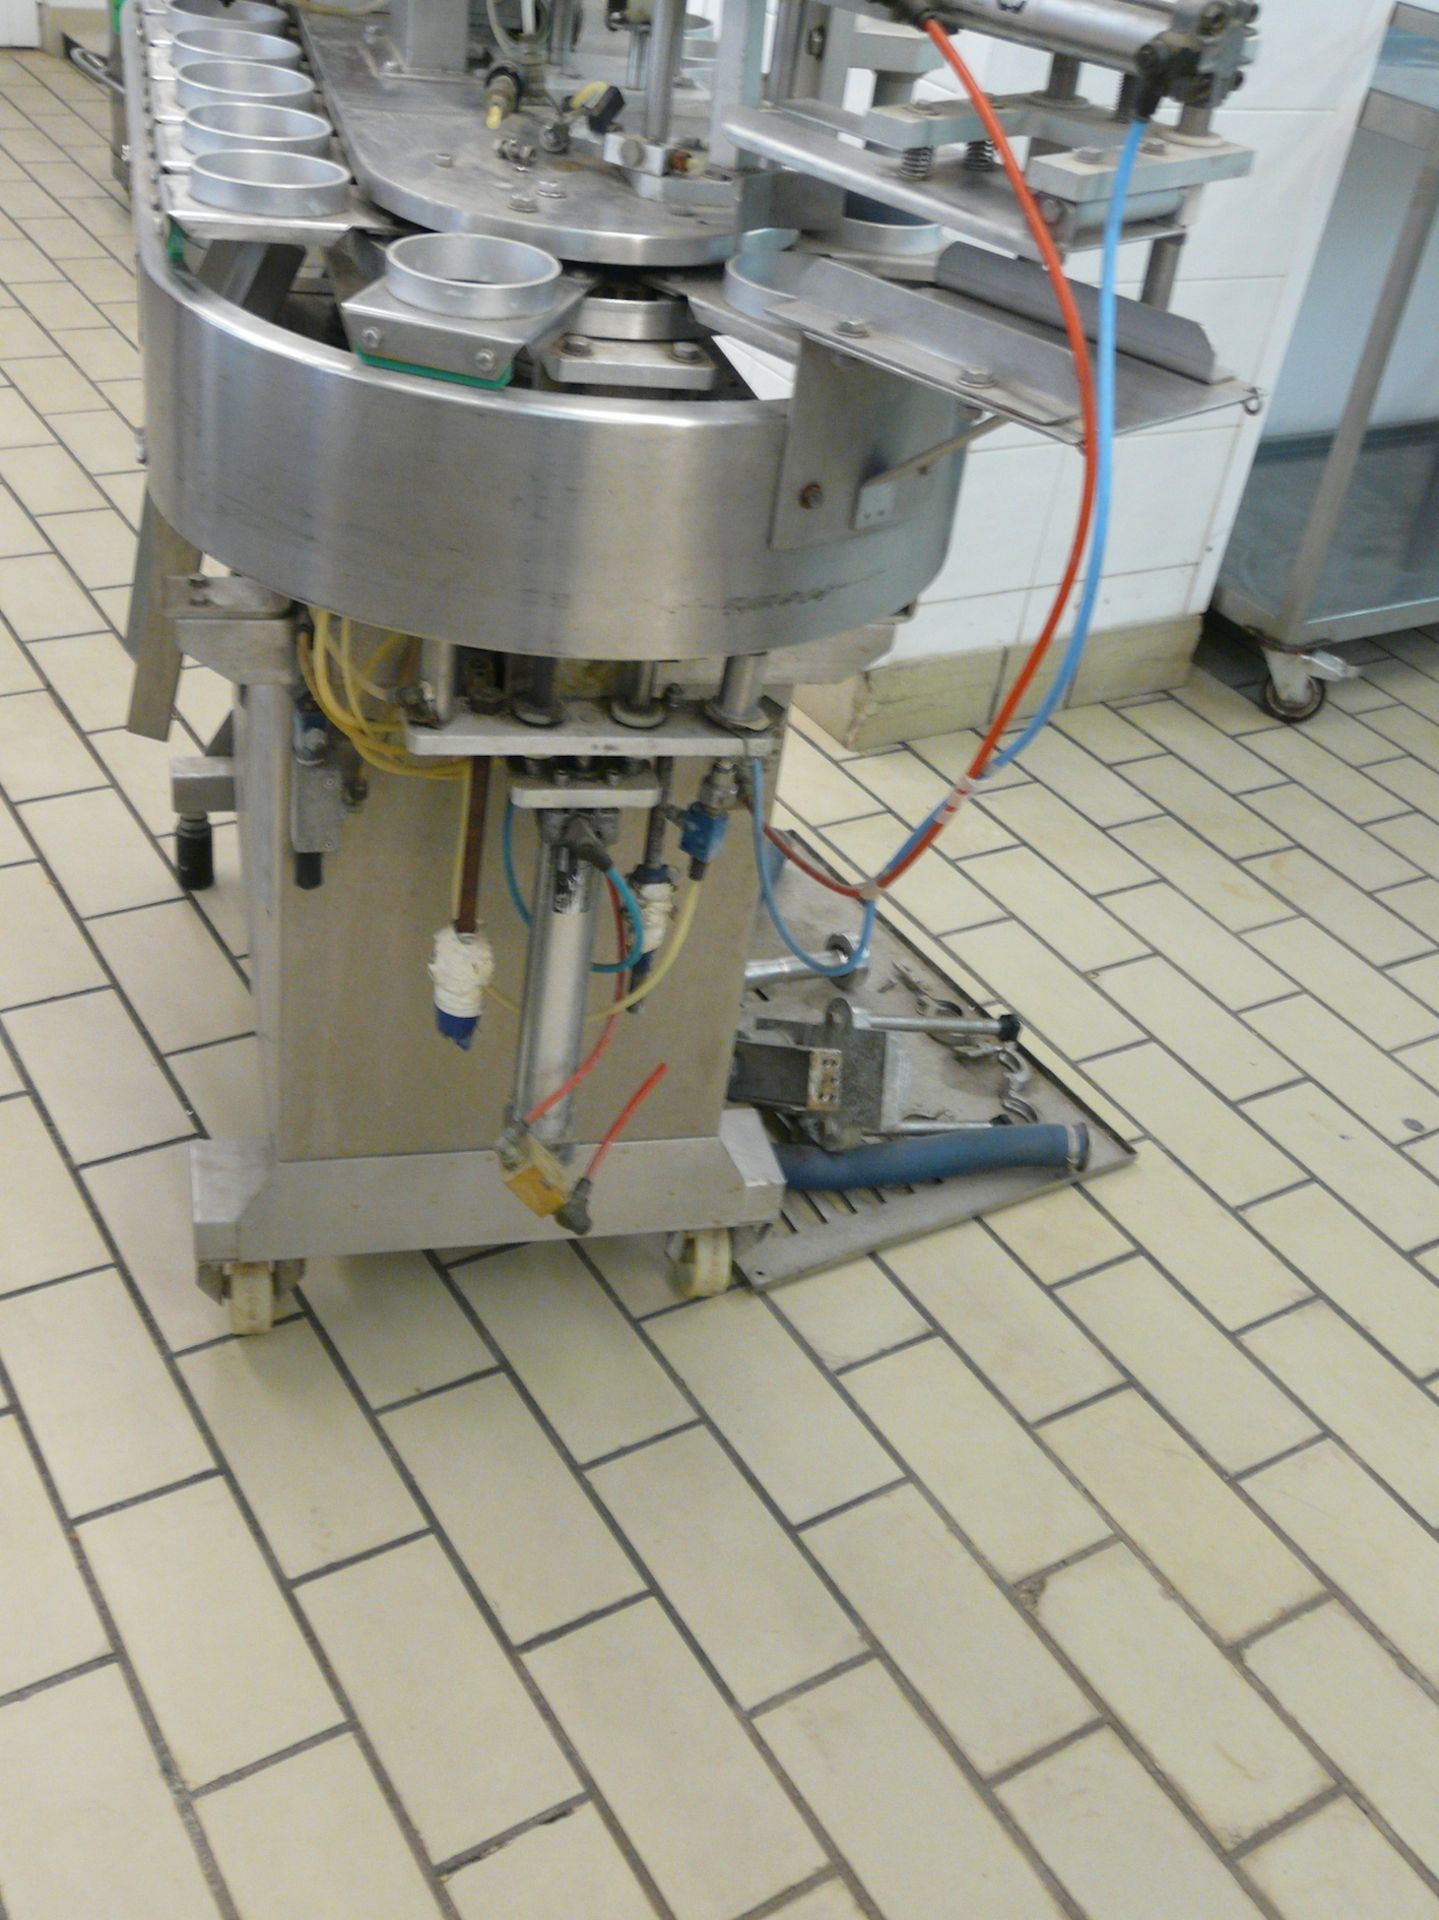 English: MARK, FILMARK 3000 Cup Filling Machine for Ice Cream 3000 Cups/Hour, 18 Cup Holders 80mm - Image 5 of 15